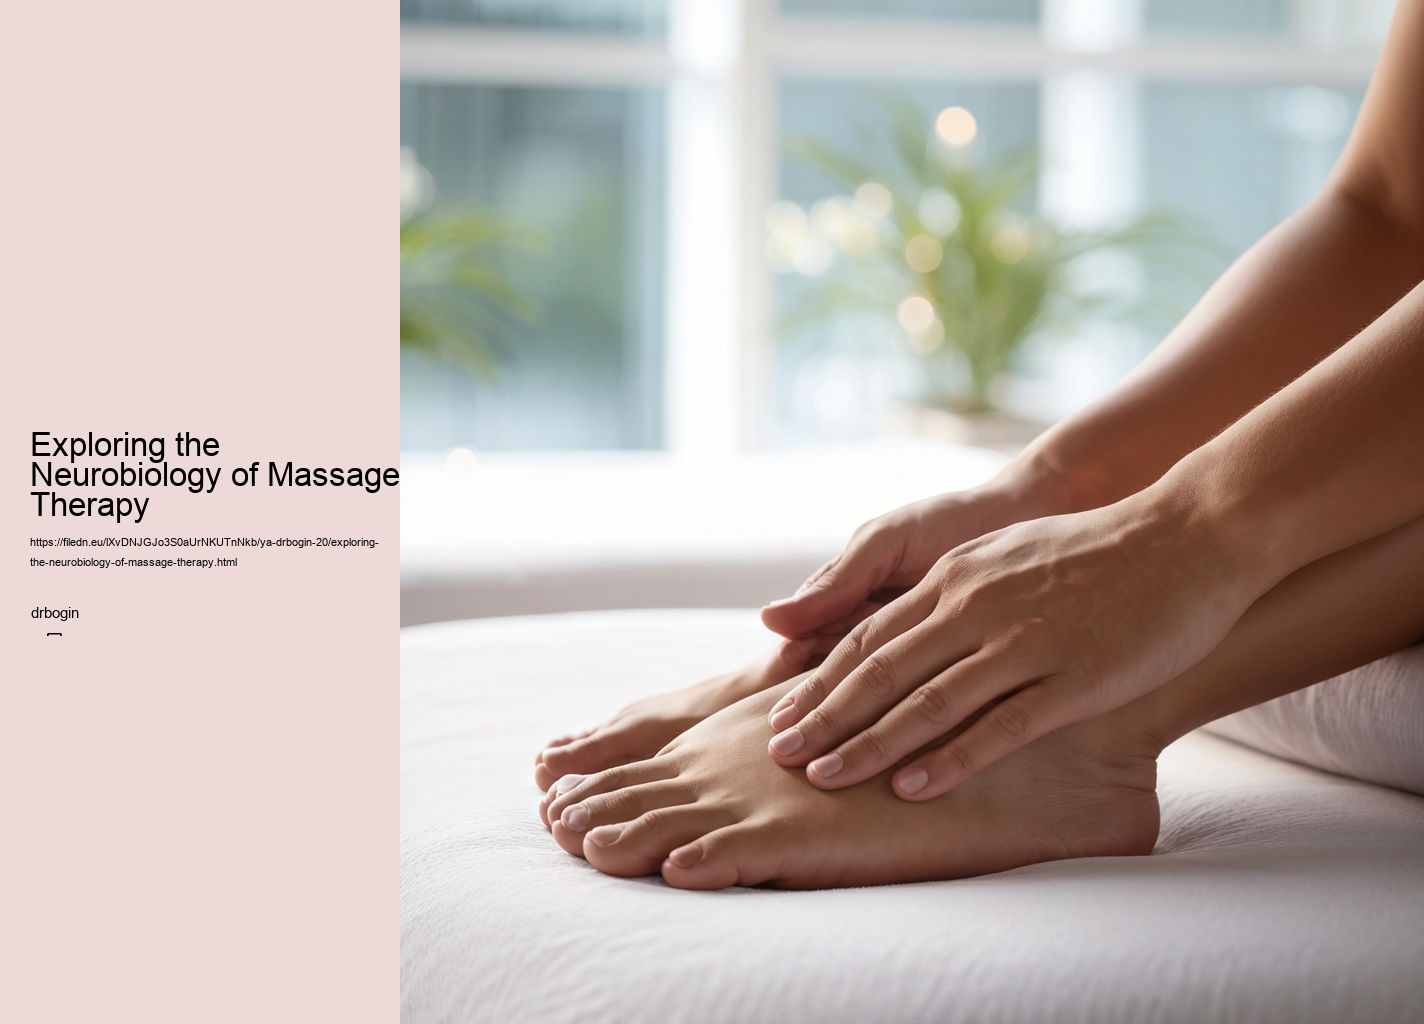 Exploring the Neurobiology of Massage Therapy